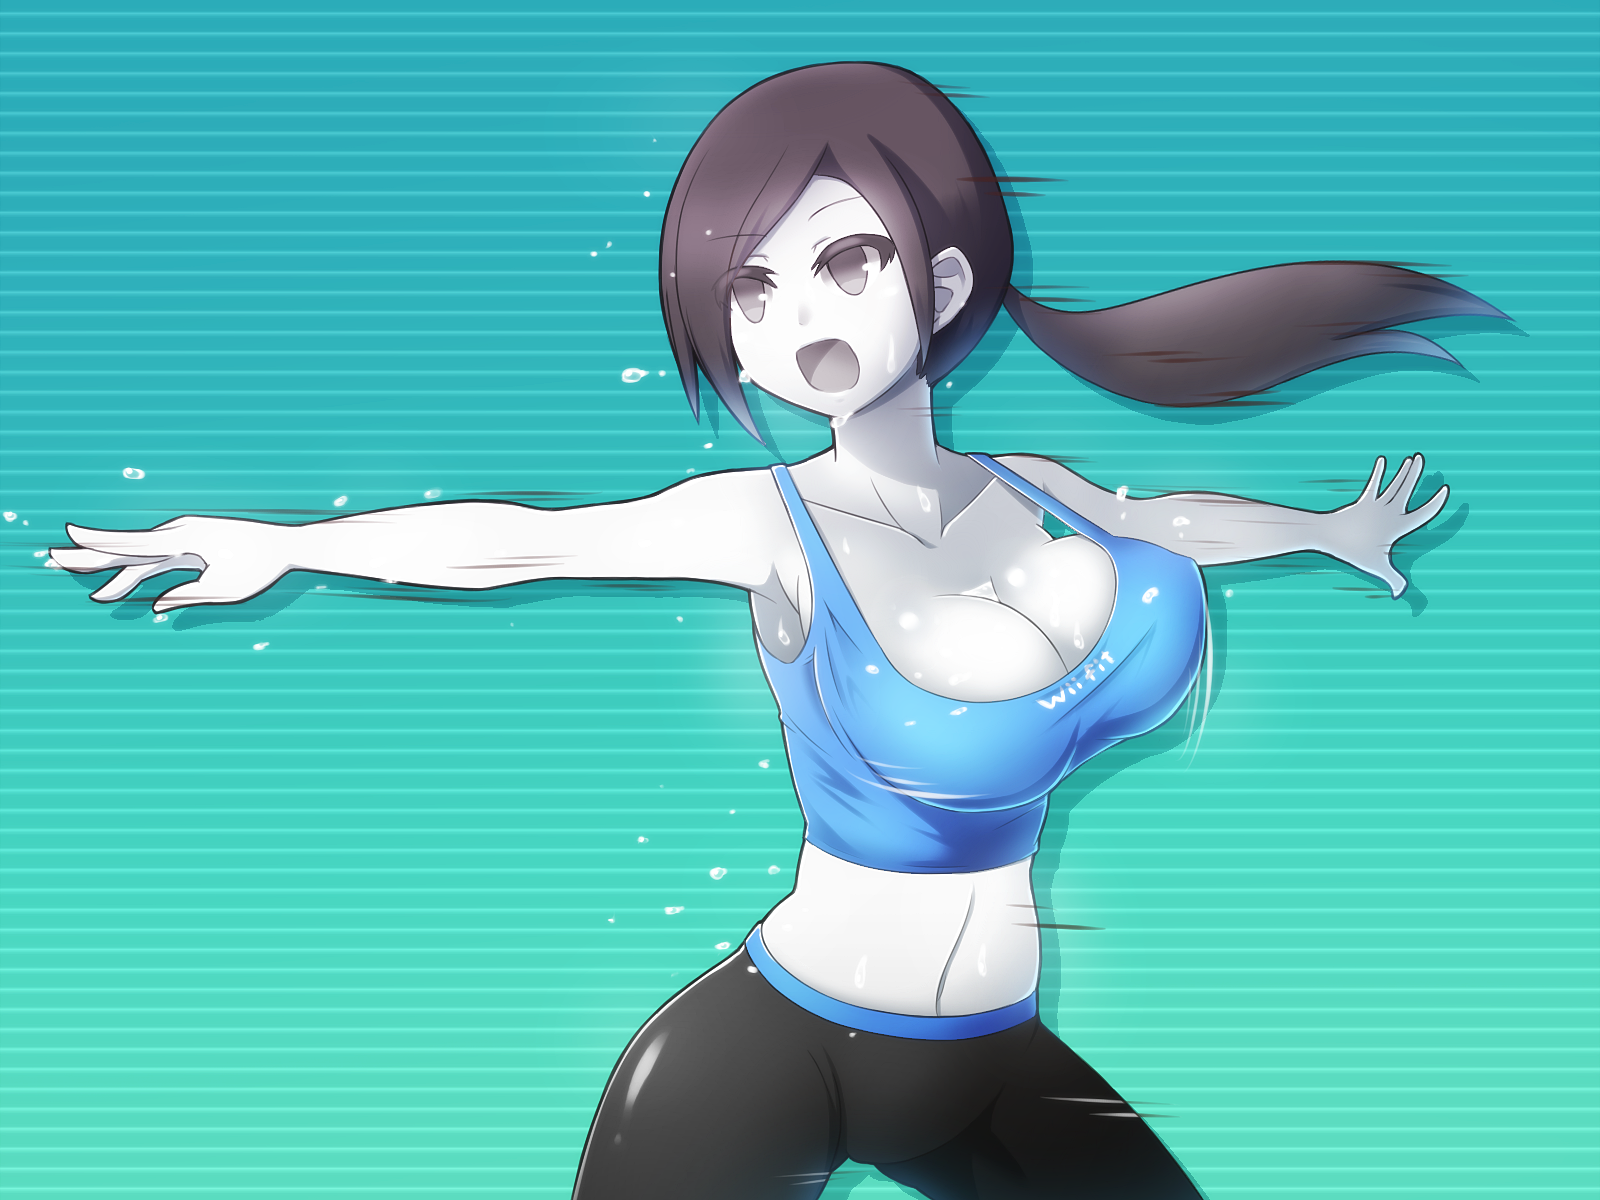 Wii fit. Wii Fit 34. Wii Fit Trainer. Нинтендо Wii Fit тренер. Wii Fit Trainer SSBU.